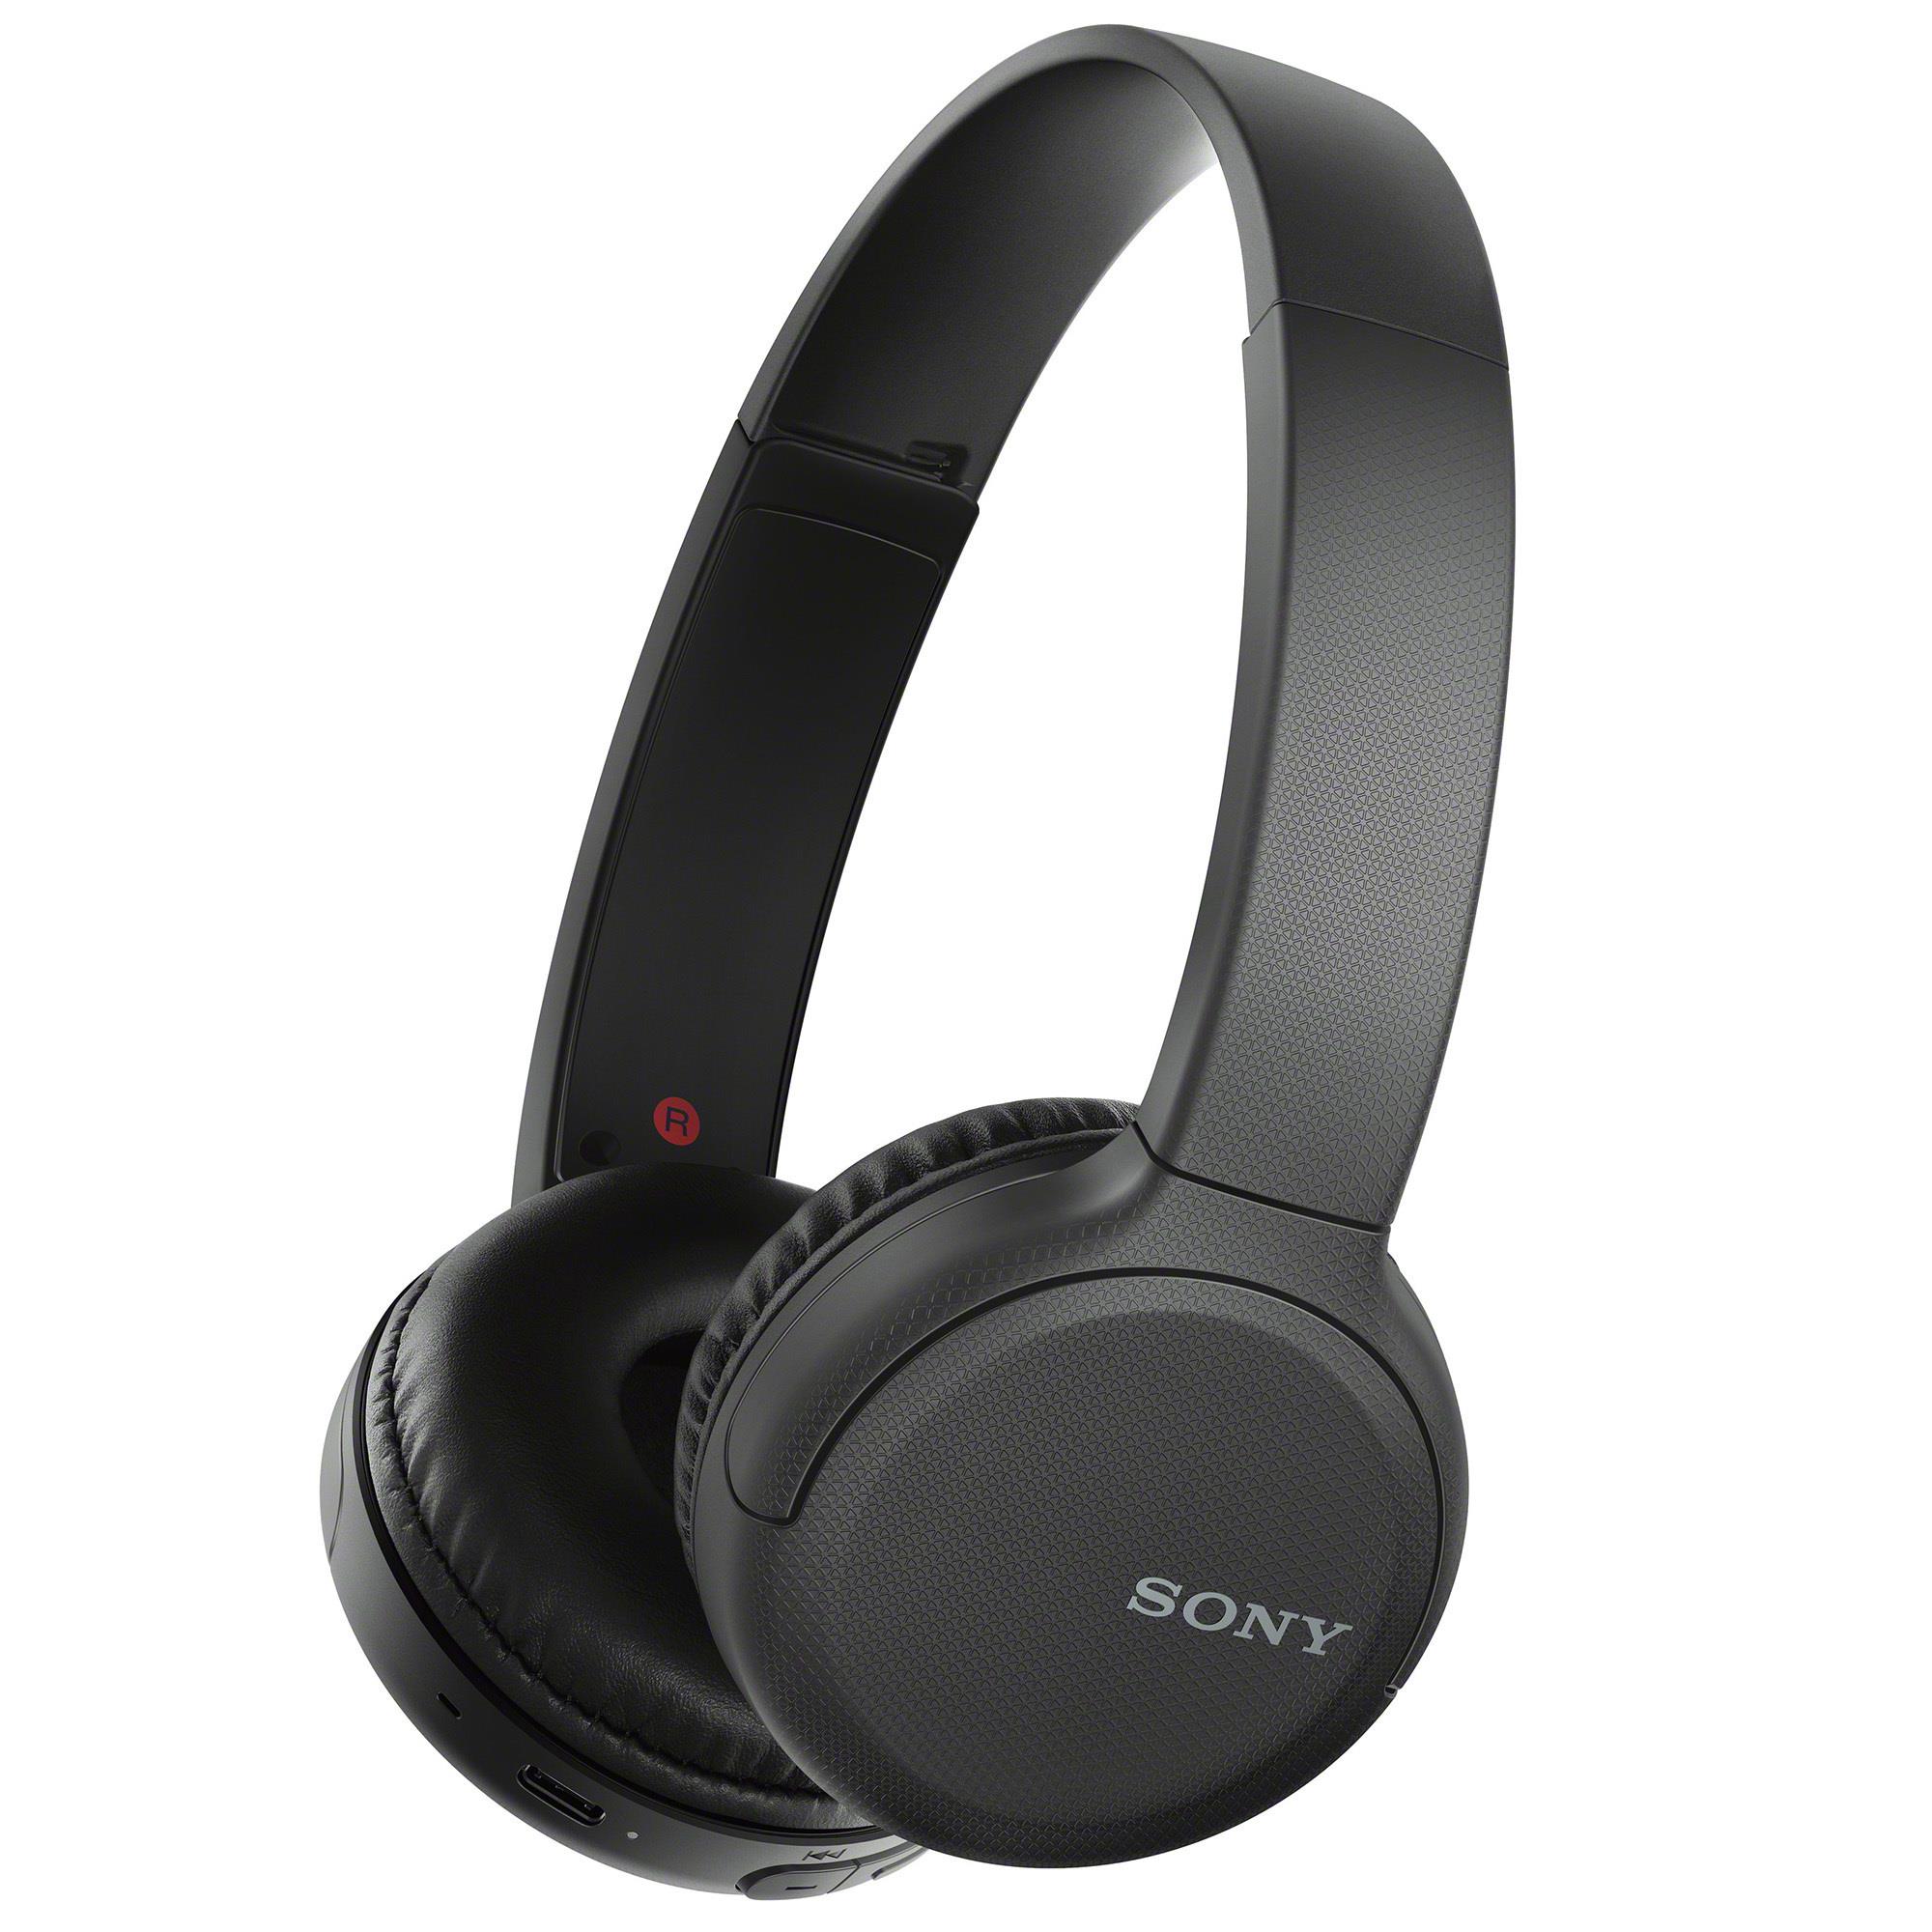 Sony WH-CH510 Wireless On-Ear Headphones (Black) with Hardshell Case Bundle - image 3 of 10